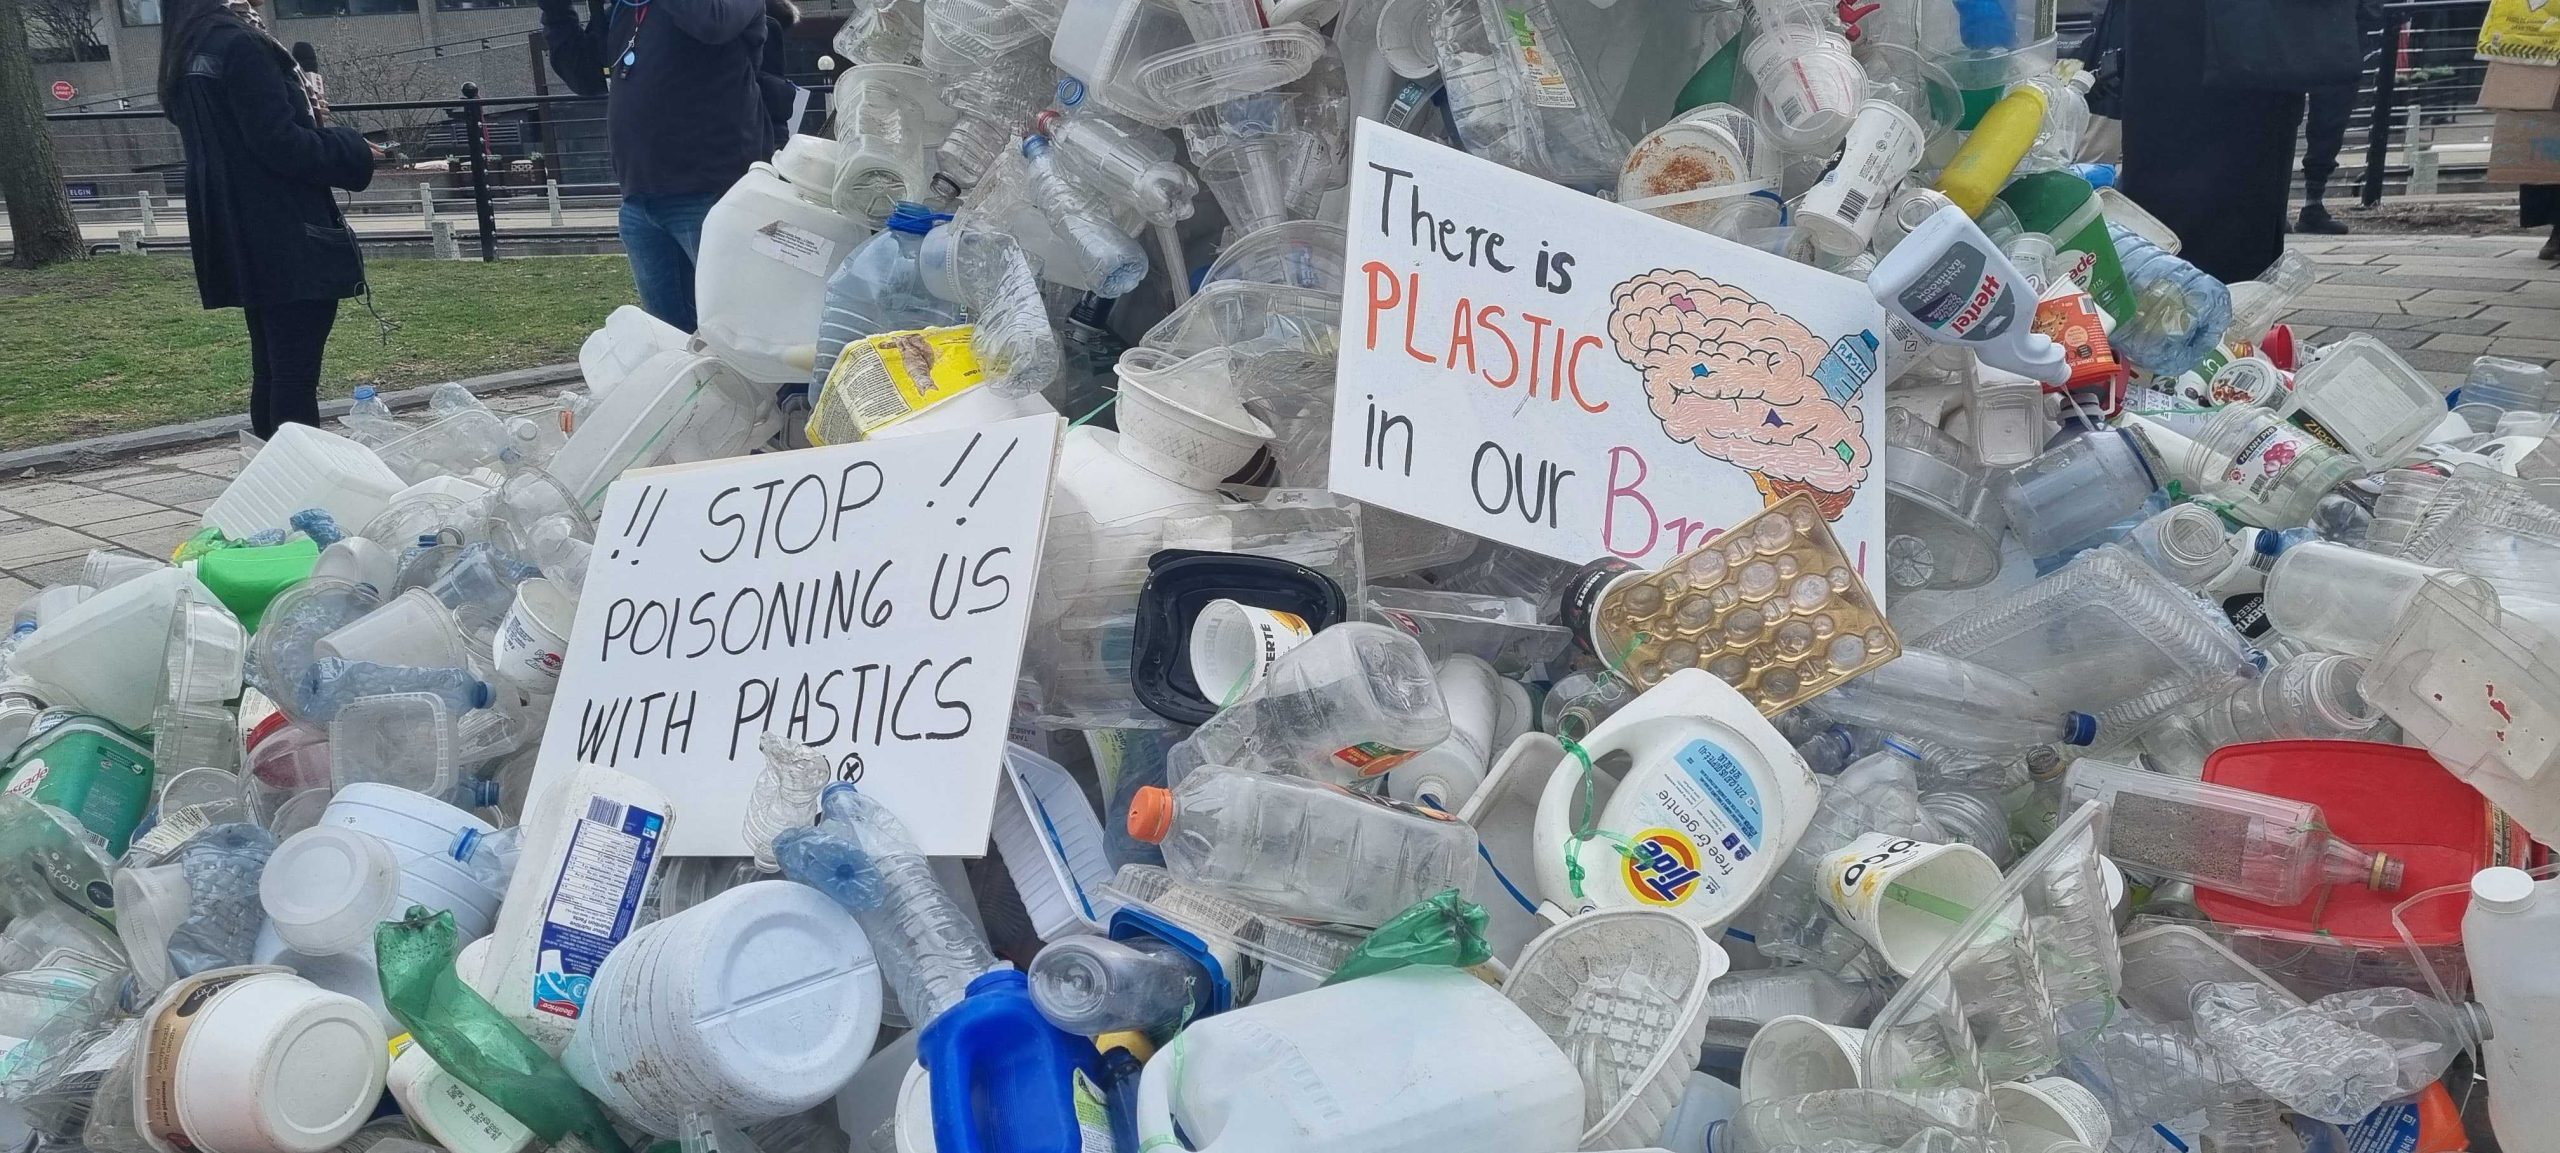 a hill of plastic bottles and other plastic waste with a placard that says: Stop poisoning us with plastics